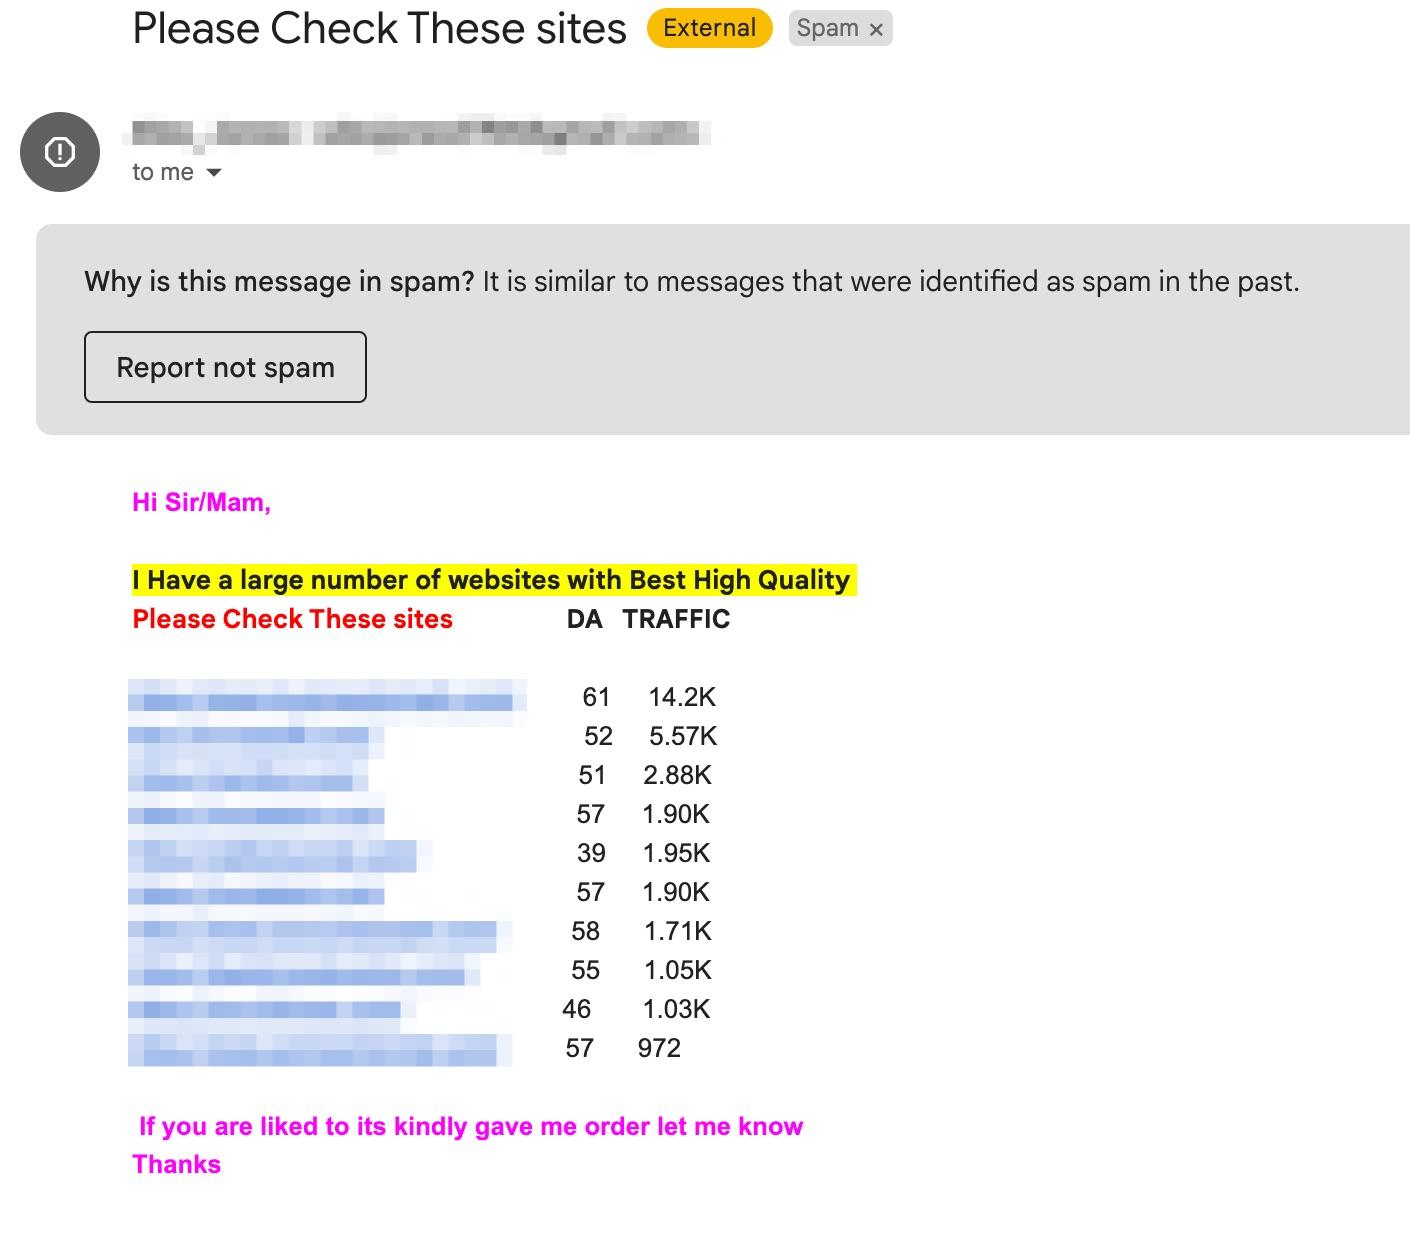 excessive buzzwords count as spam